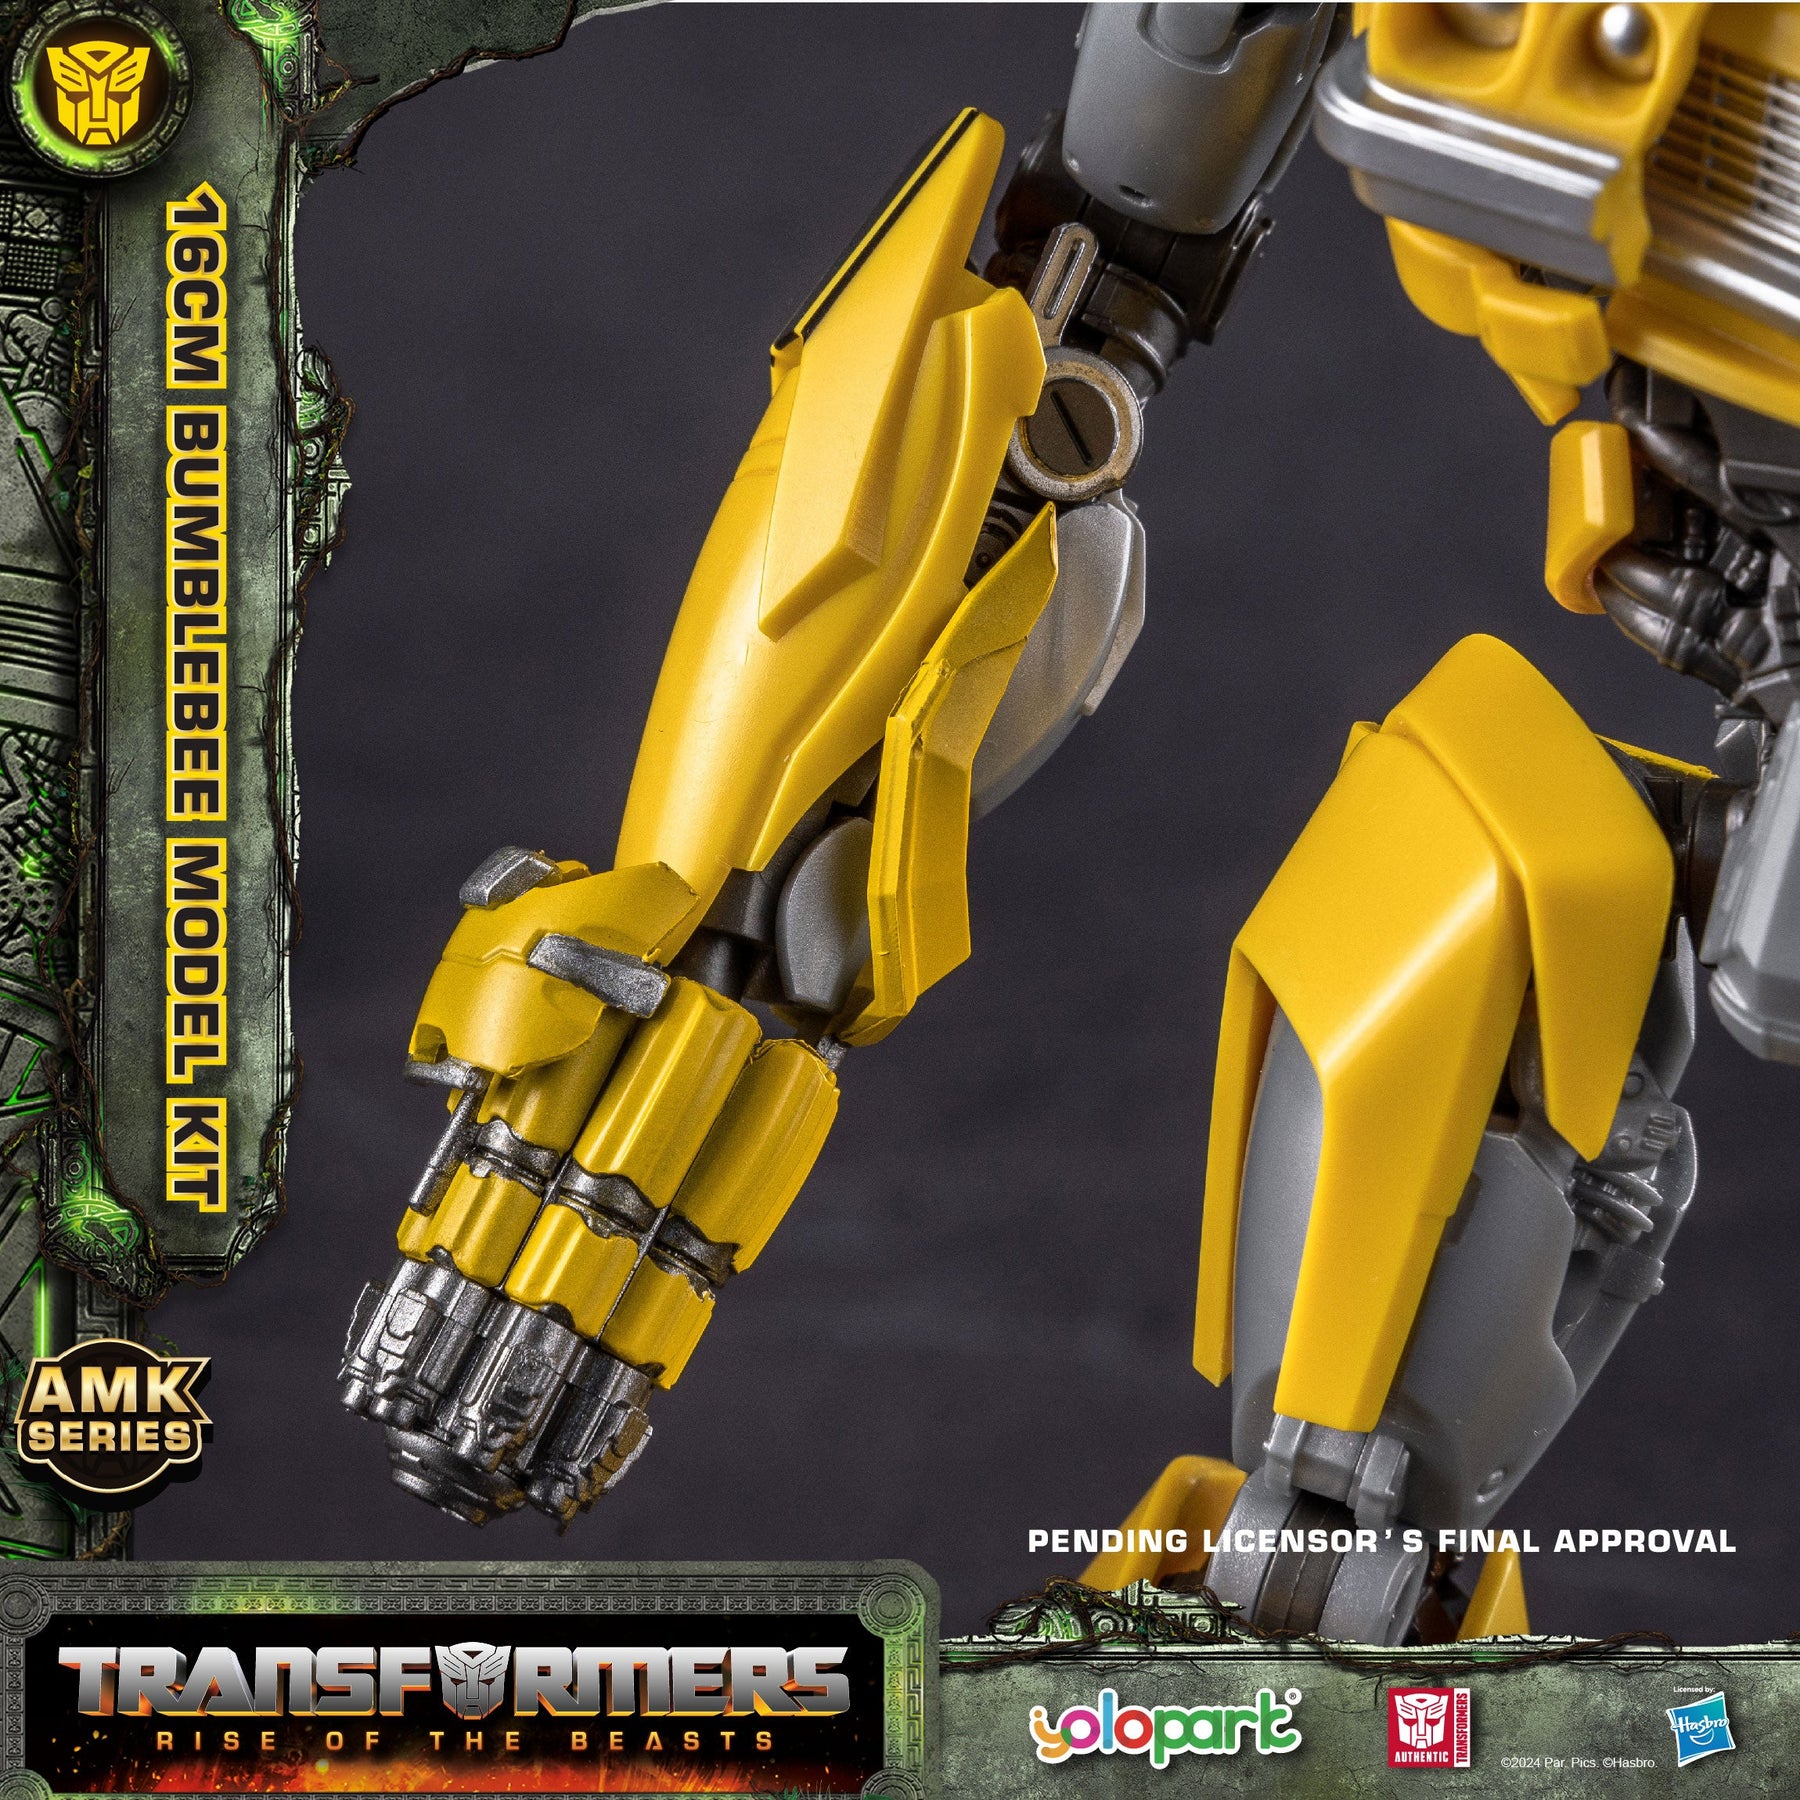 AMK SERIES Transformers Movie 7: Rise of The Beasts - 16cm Bumblebee Model Kit